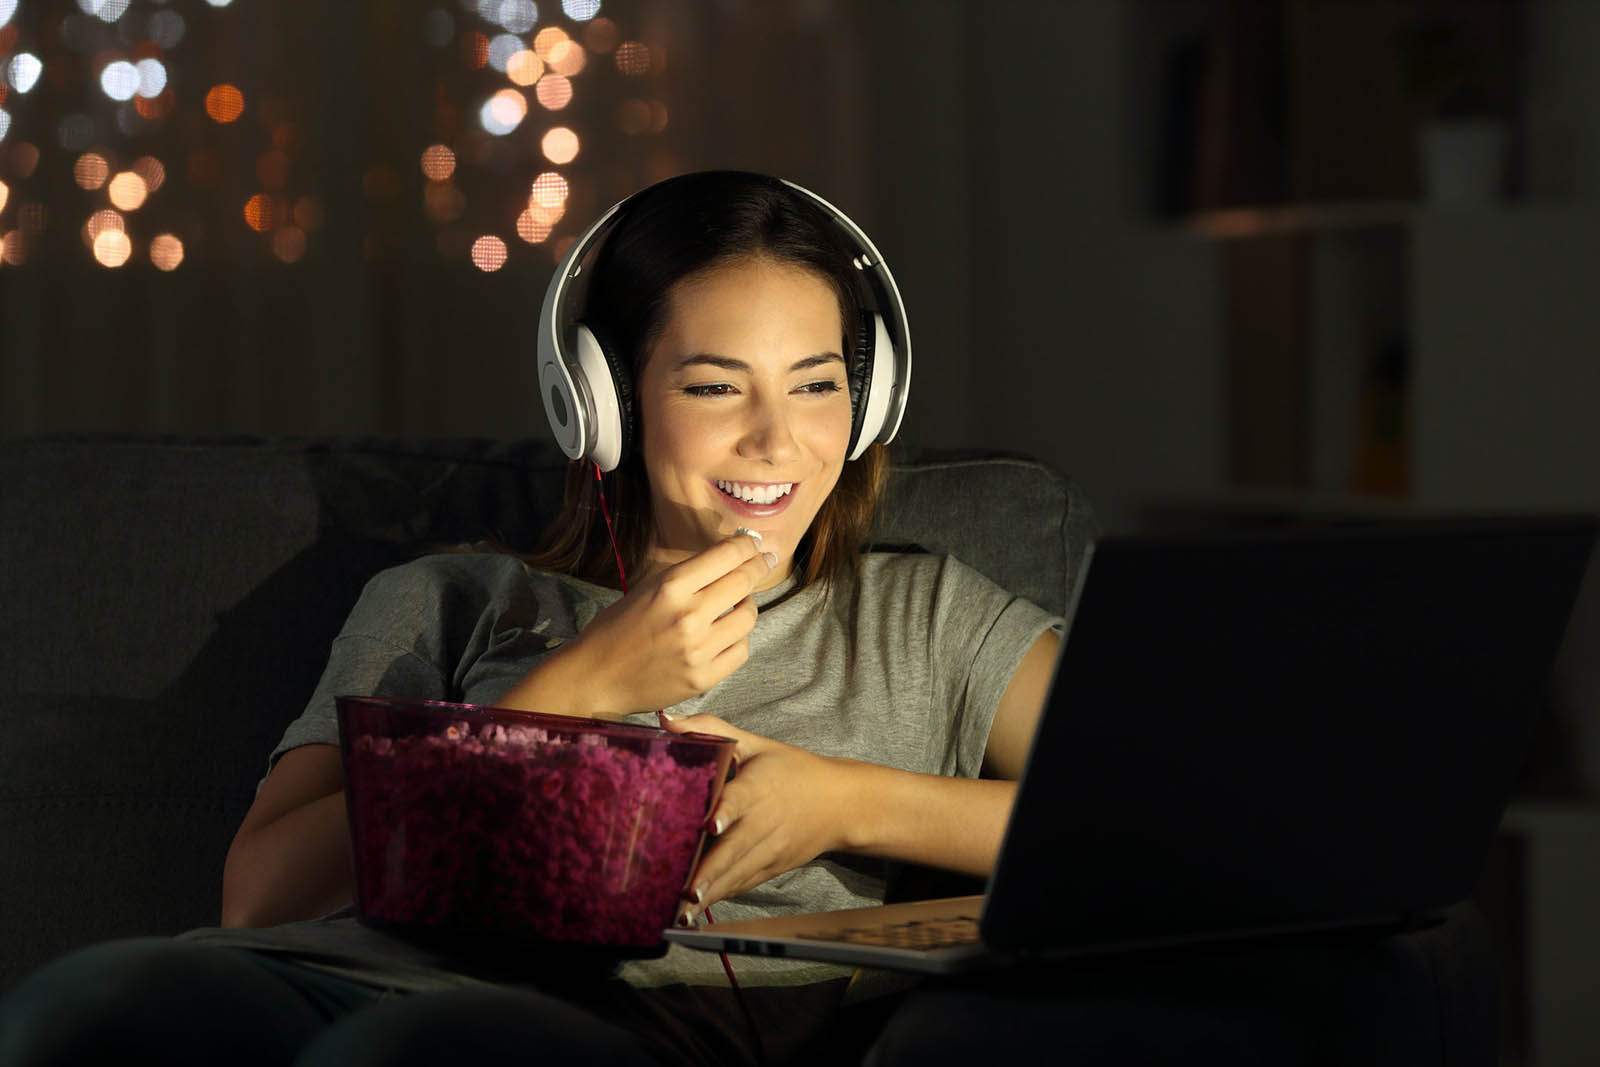 This Trivia Quiz Is Not THAT Hard, But Can You Pass It? Watching Streaming Netflix Show With Popcorn